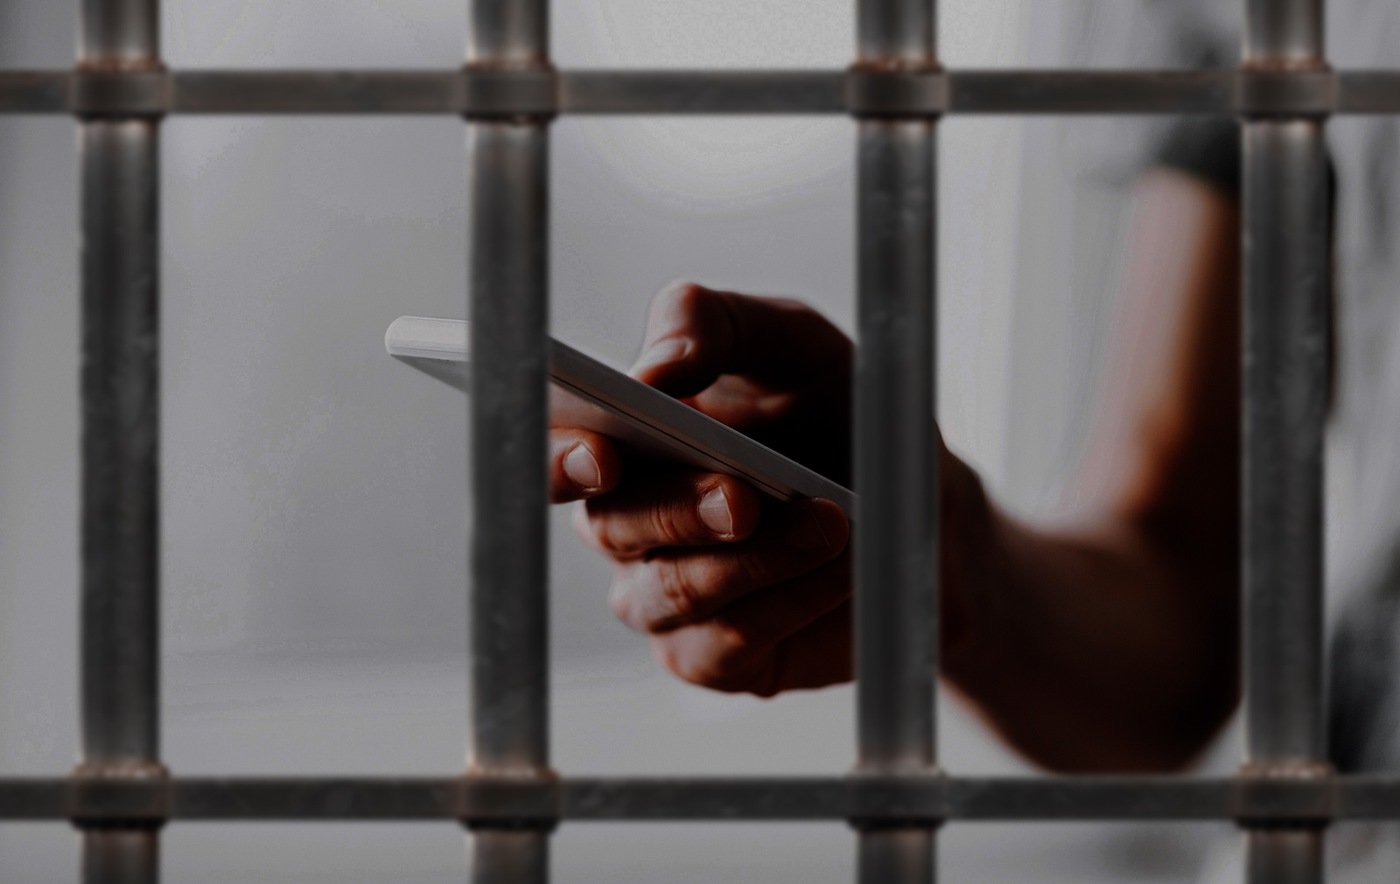 Stock image of a prisoner in a cell holding a smart phone.